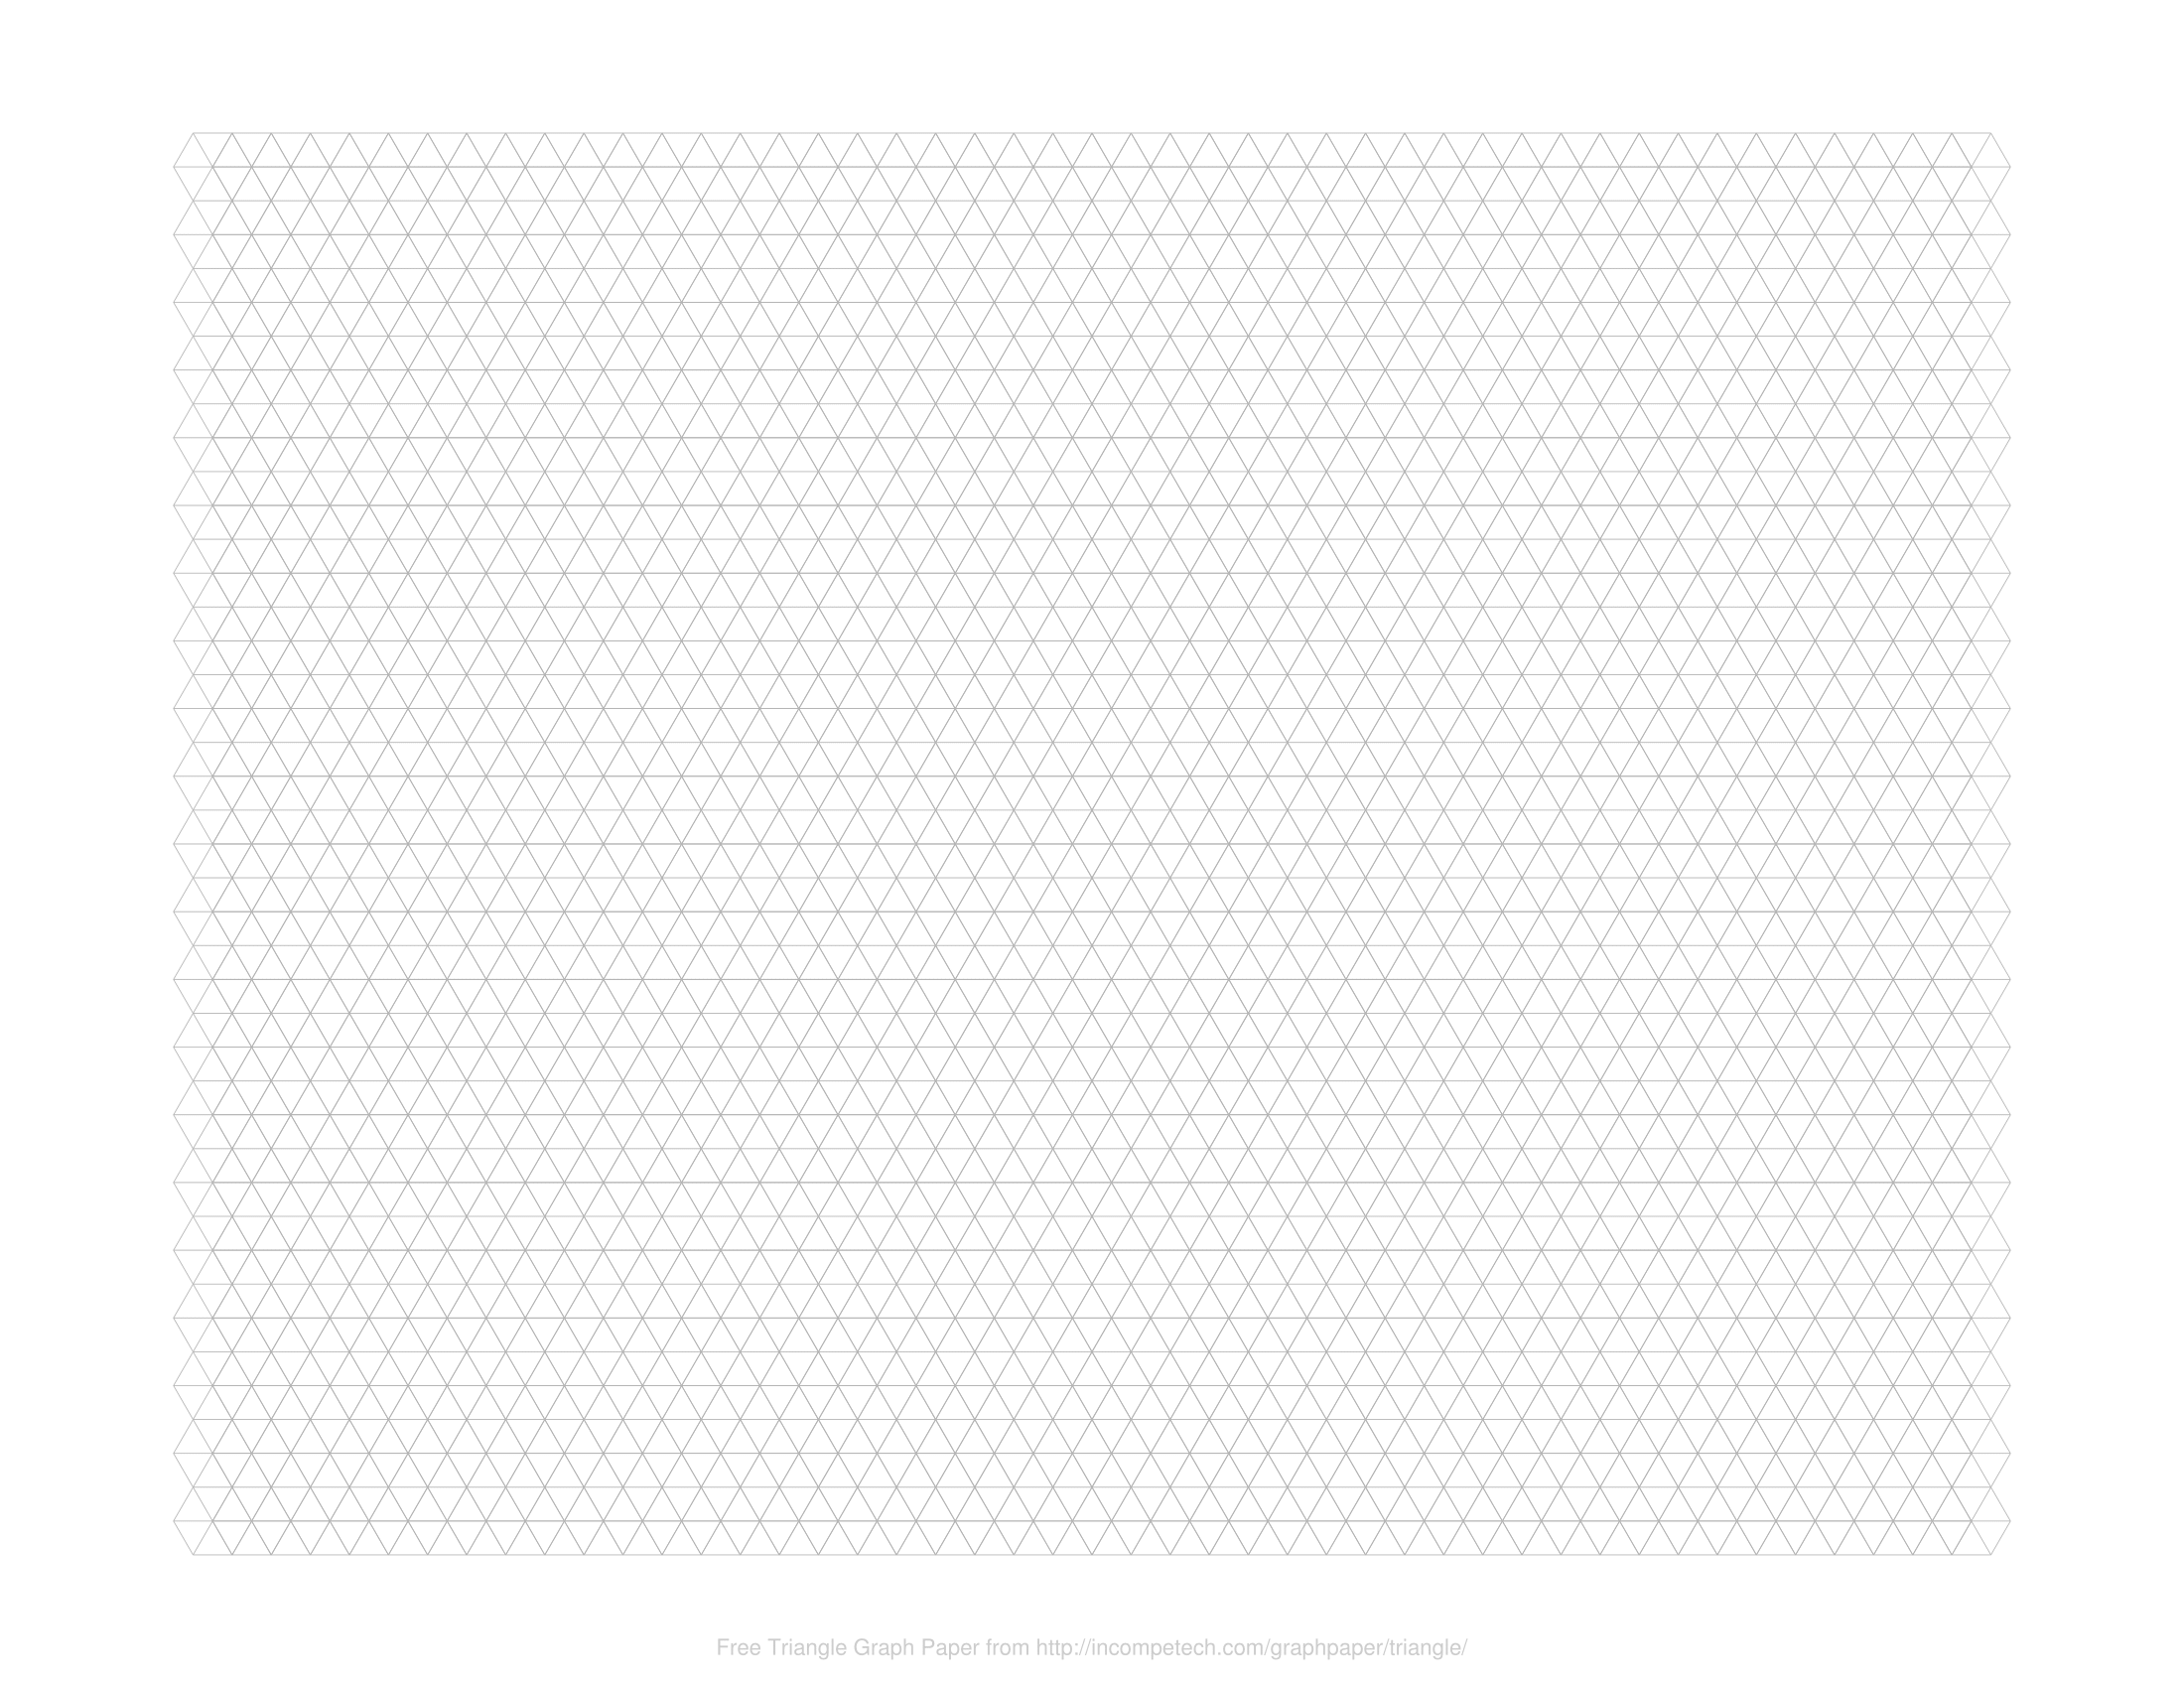 Free Online Graph Paper / Triangle Dots